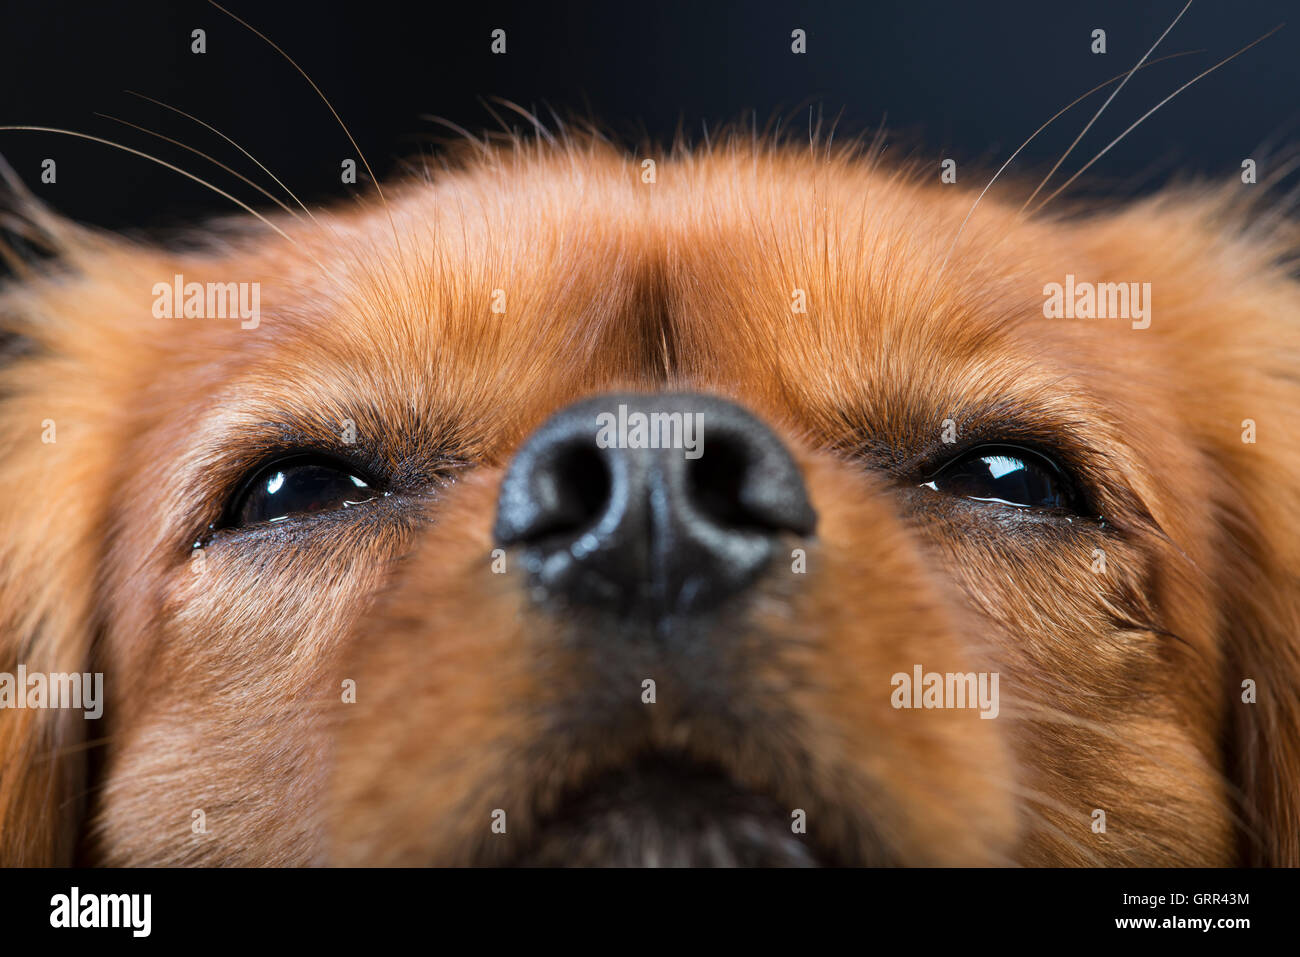 Close-up portrait of a King Charles Cavalier Spaniel Stock Photo